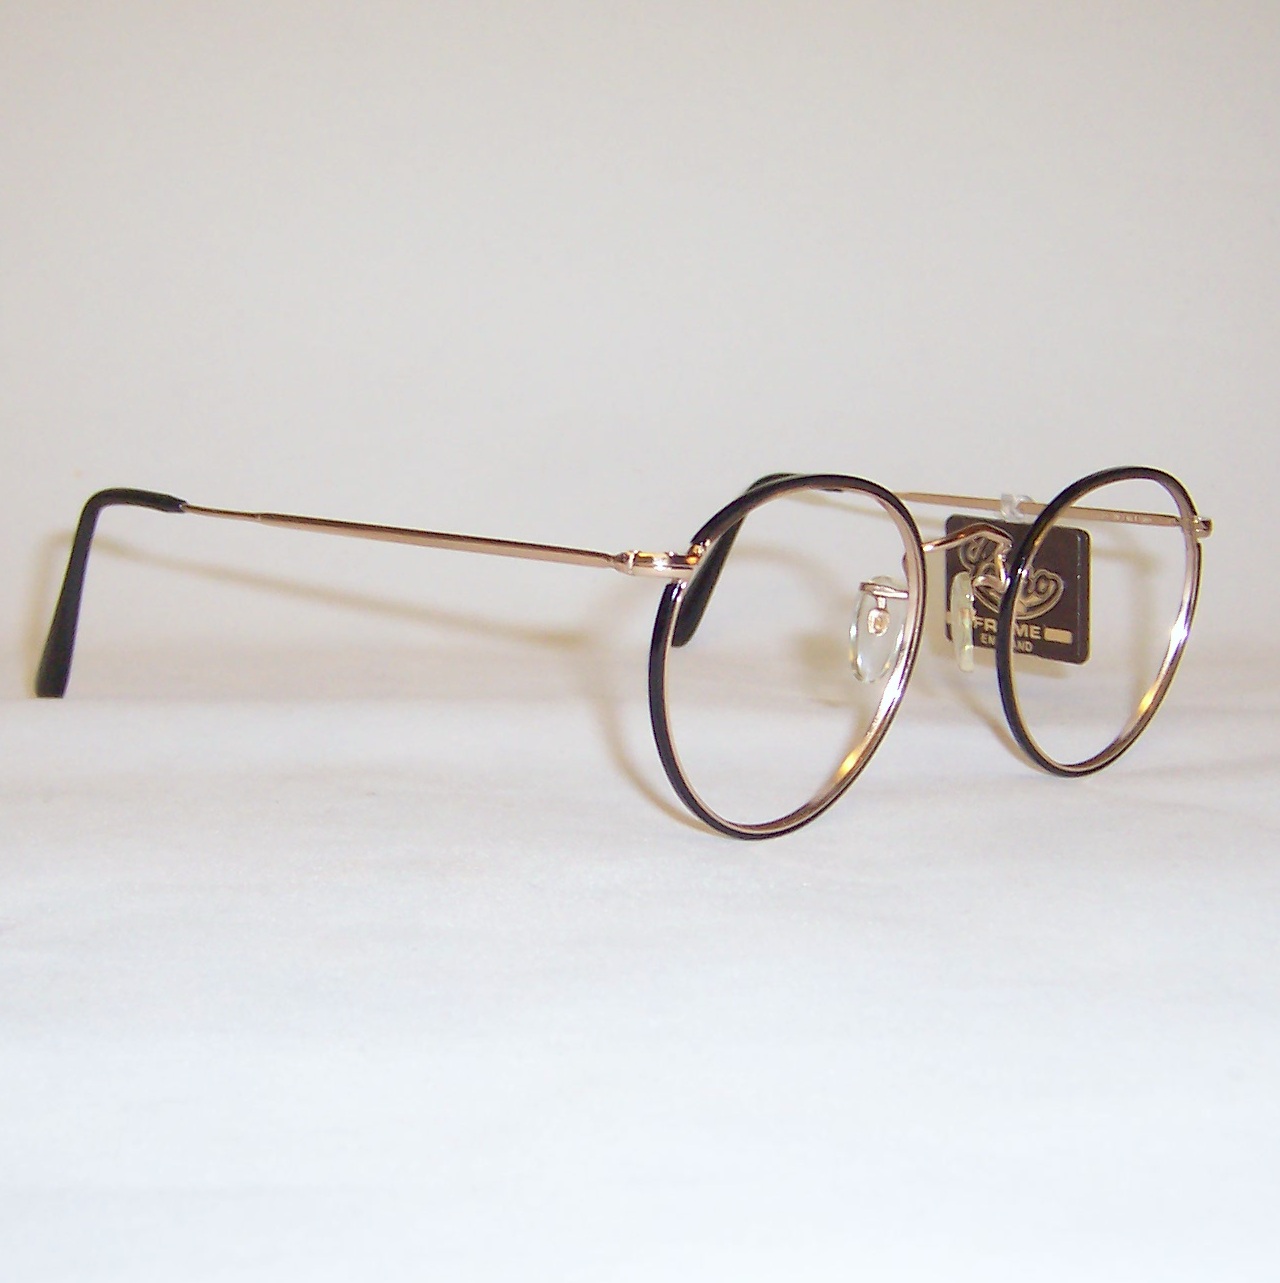 Classic 1970s gold/black Slim Rim Panto spectacles by Lesbro England ...